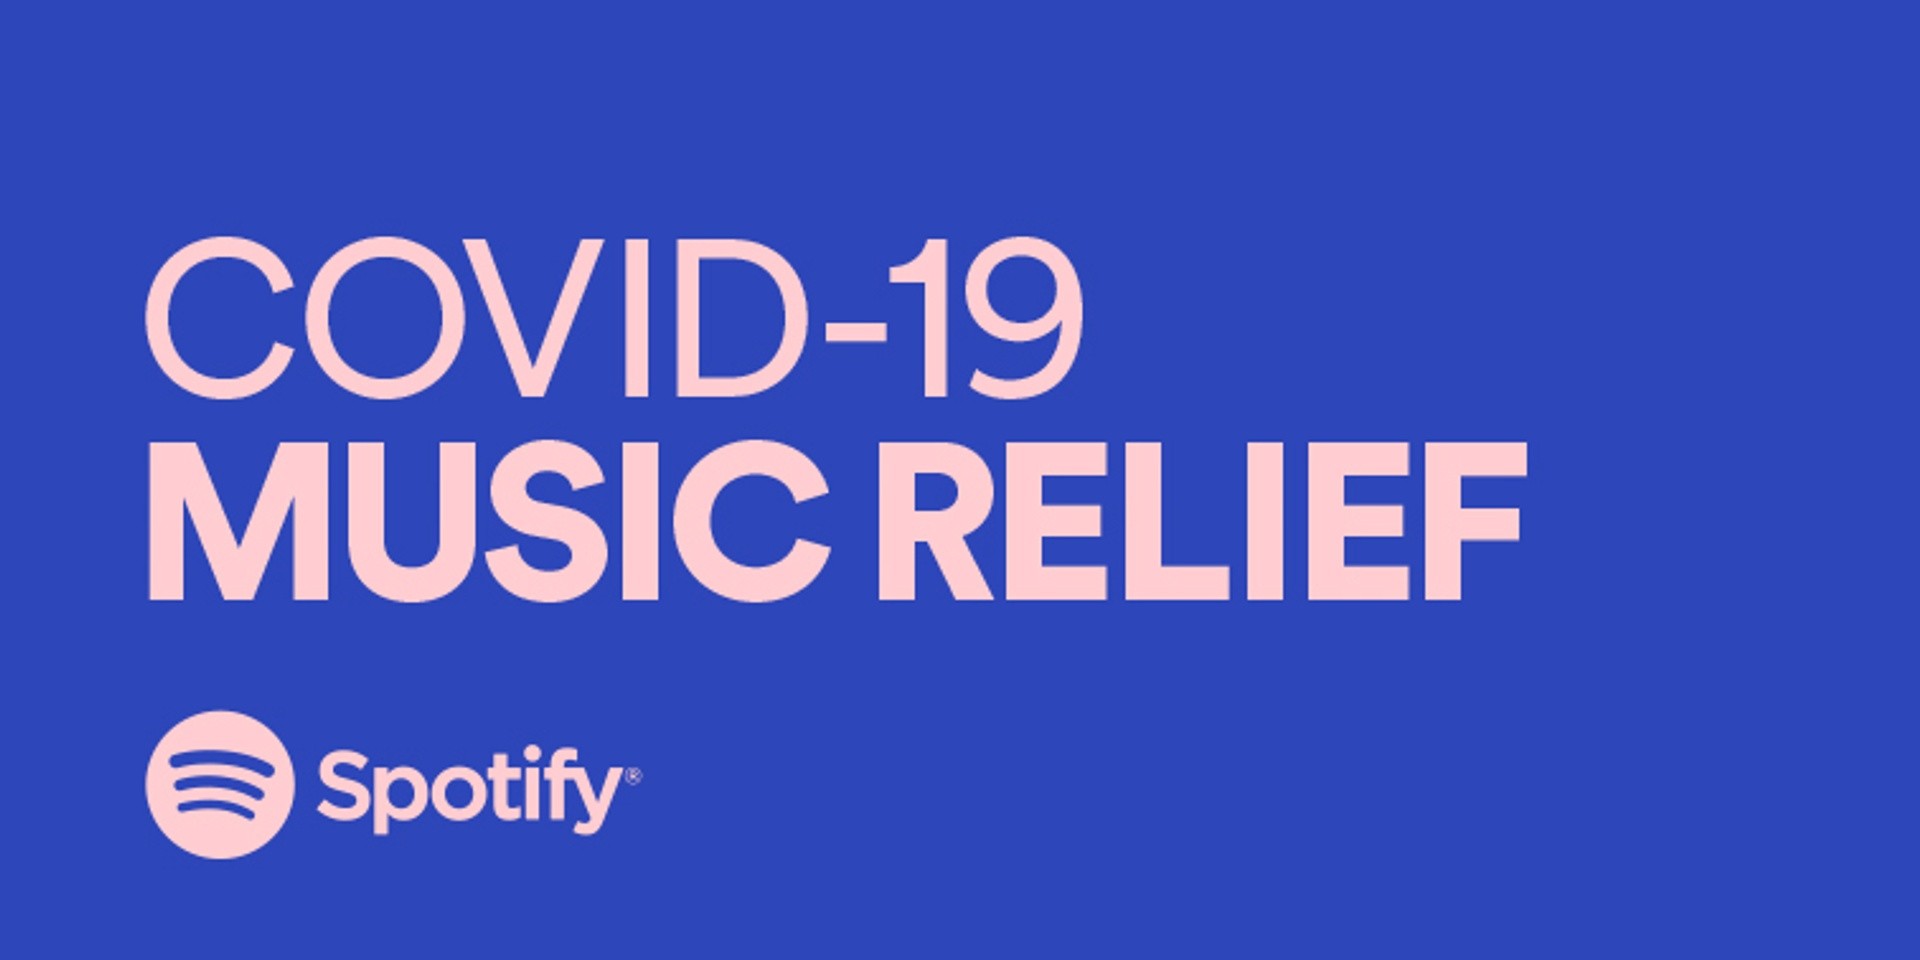 Spotify rolls out initiatives to support the music community in COVID-19 crisis